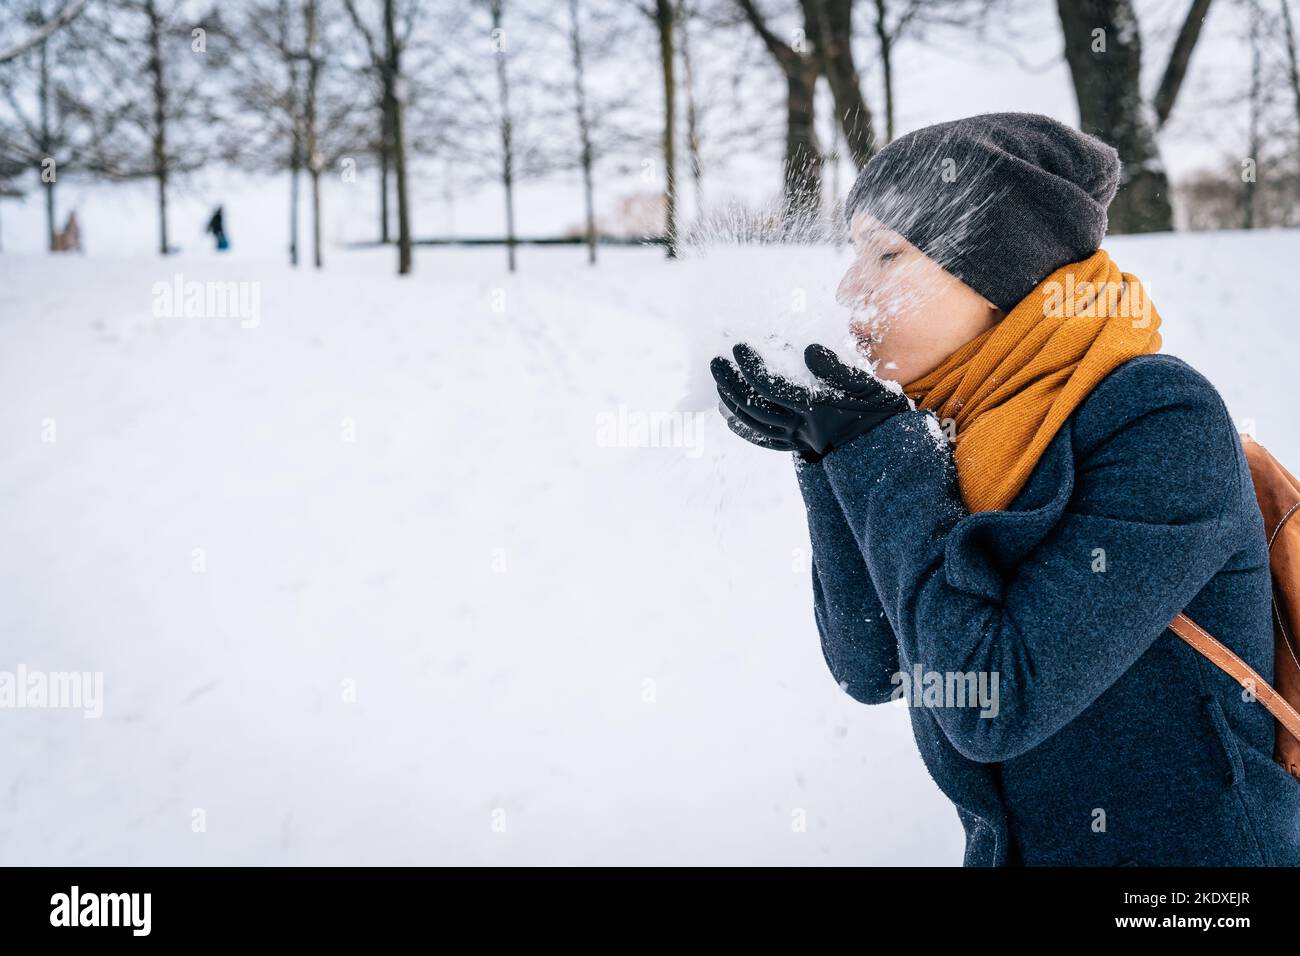 A woman blows snow, collected in the palm of her hand against the background of snow-covered nature. Stock Photo